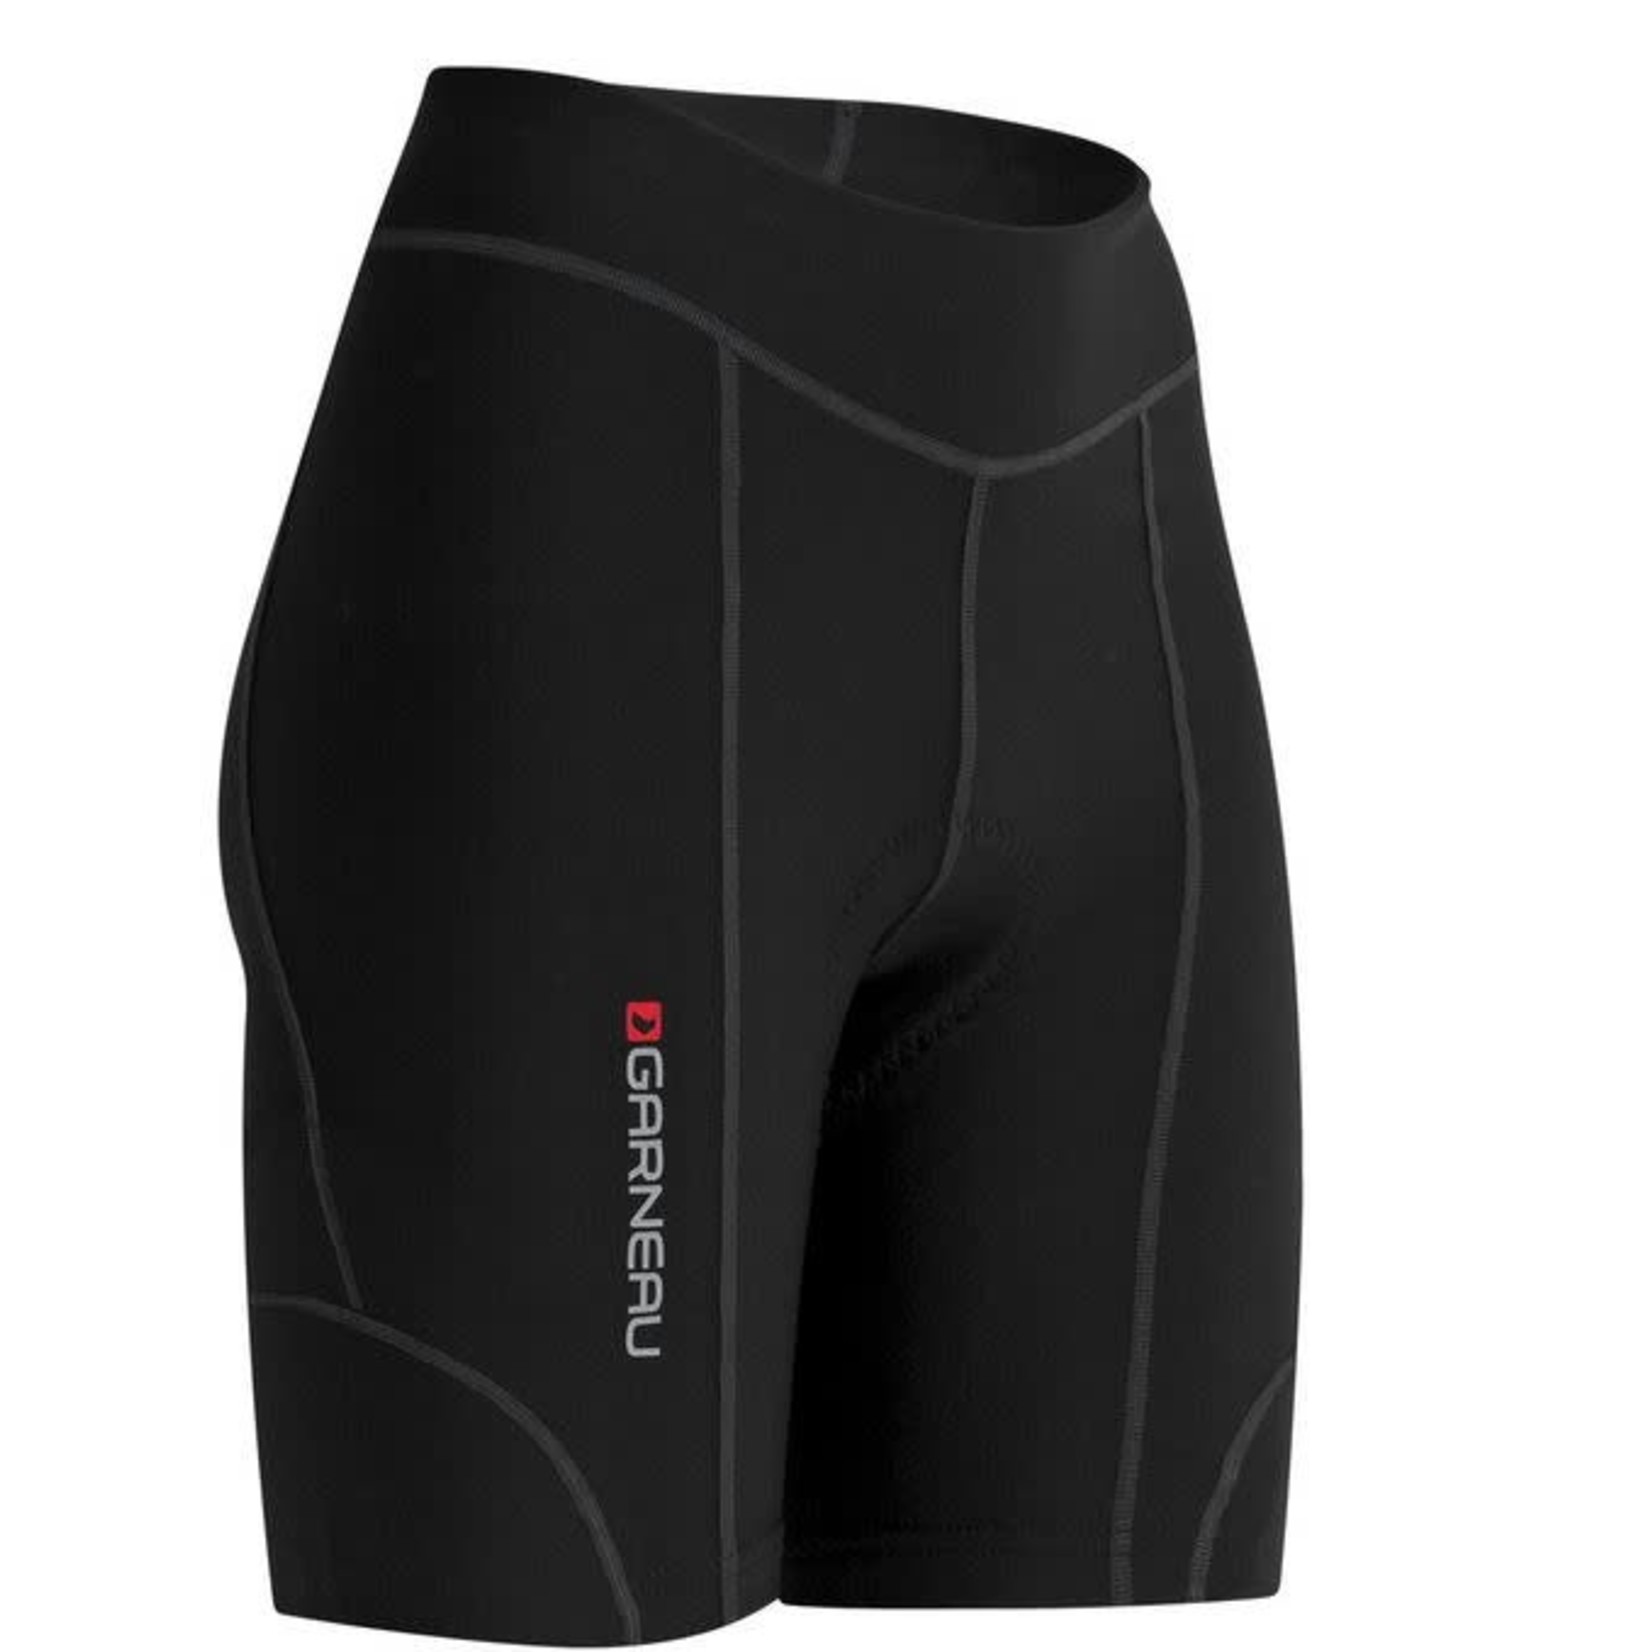  Louis Garneau Oslo Tights - Women's Black, S : Cycling  Compression Shorts : Clothing, Shoes & Jewelry